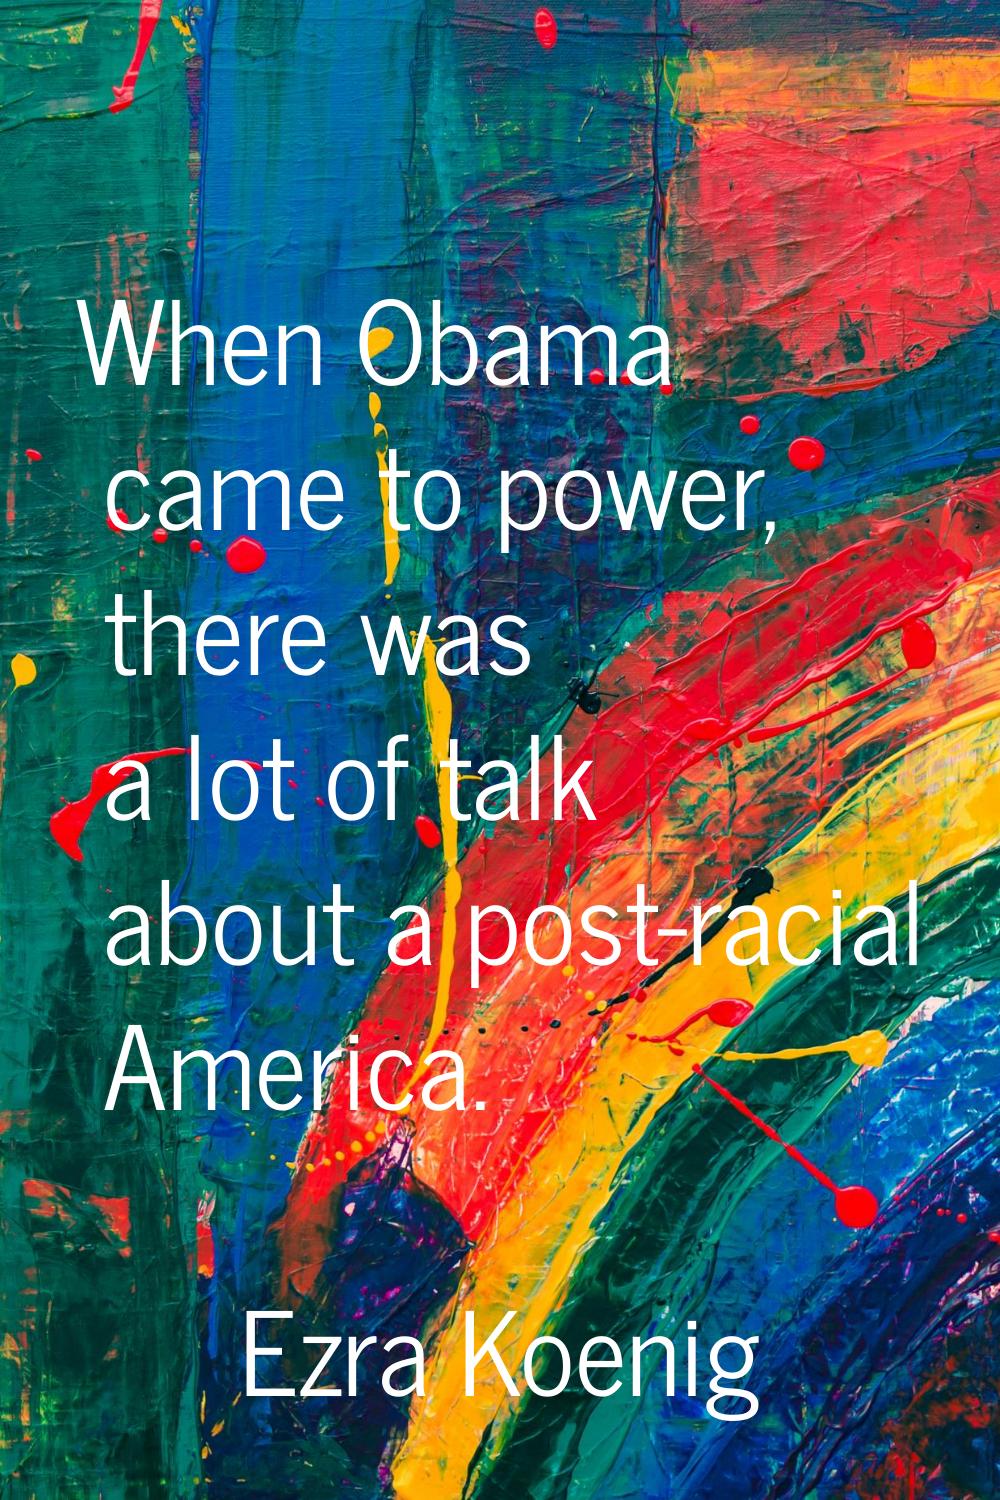 When Obama came to power, there was a lot of talk about a post-racial America.